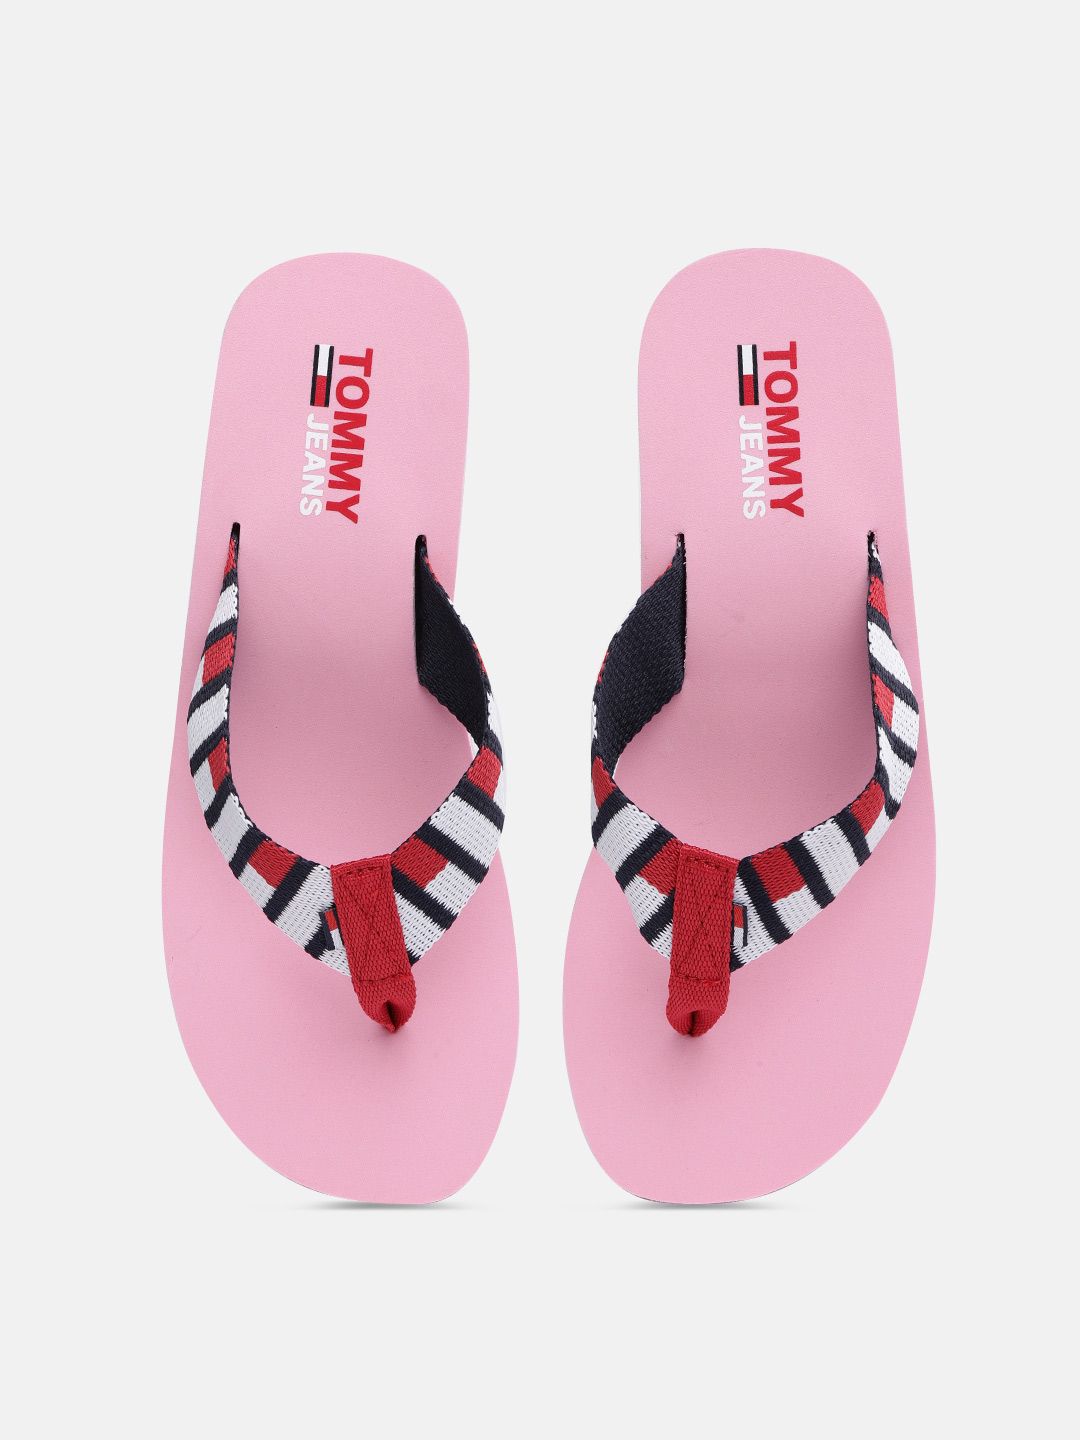 Tommy Hilfiger Women Pink Striped Thong Flip-Flops Price in India